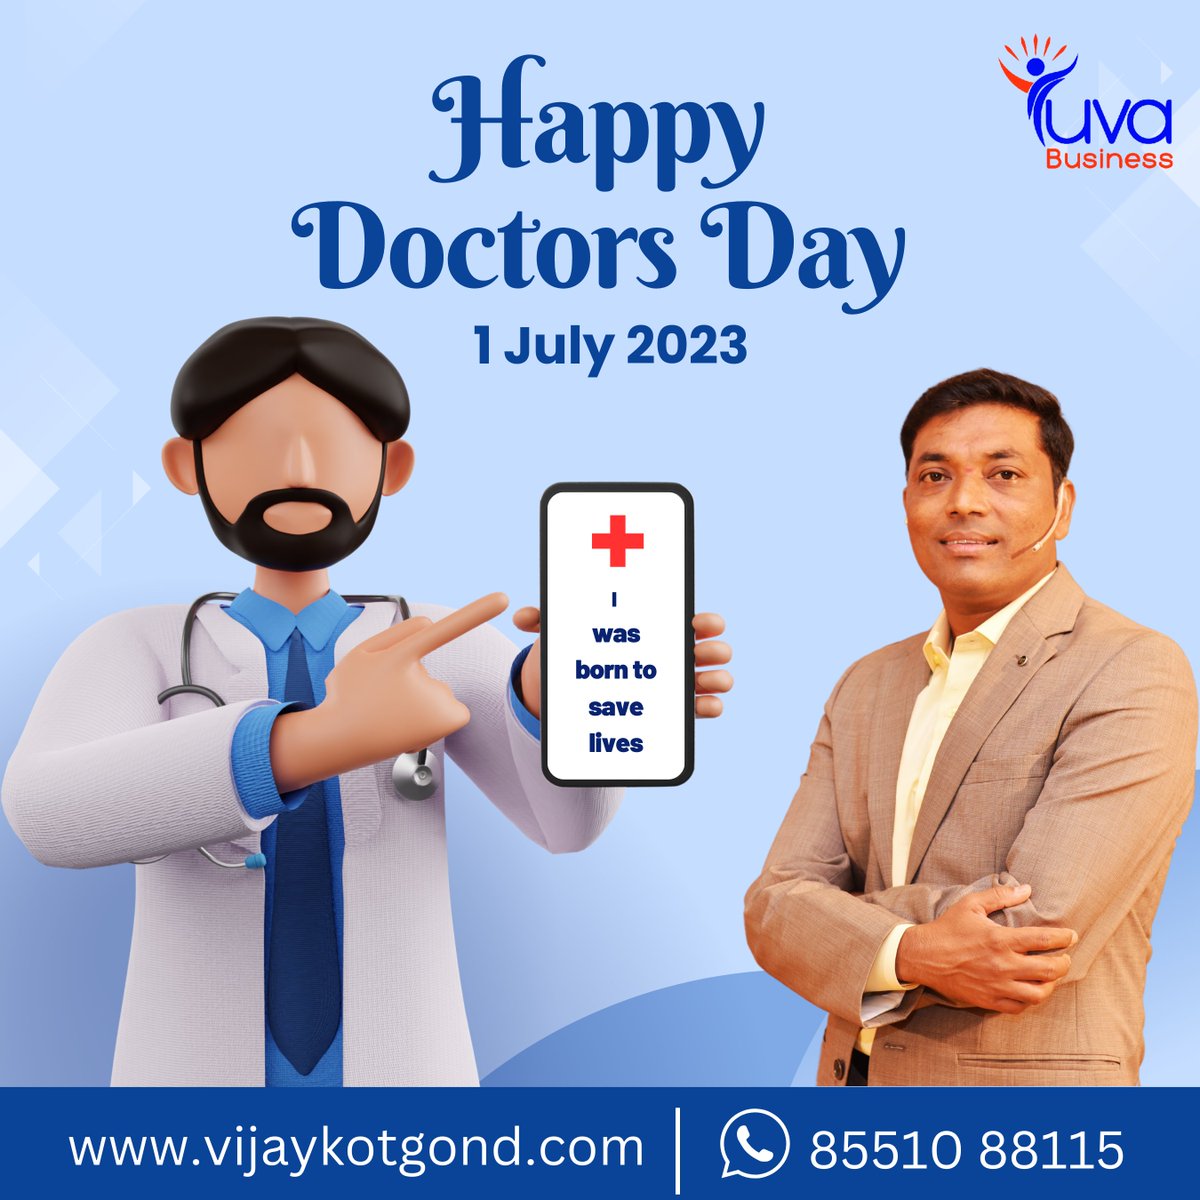 #HappyDoctorsDay ! Your unwavering commitment, compassion & expertise inspire us. We deeply appreciate your selflessness in healing & saving lives. Thank you for being the embodiment of hope.
#Gratitude #Compassion #HealingLives #Inspiration #Hope #HealthcareHeroes #VijayKotgond